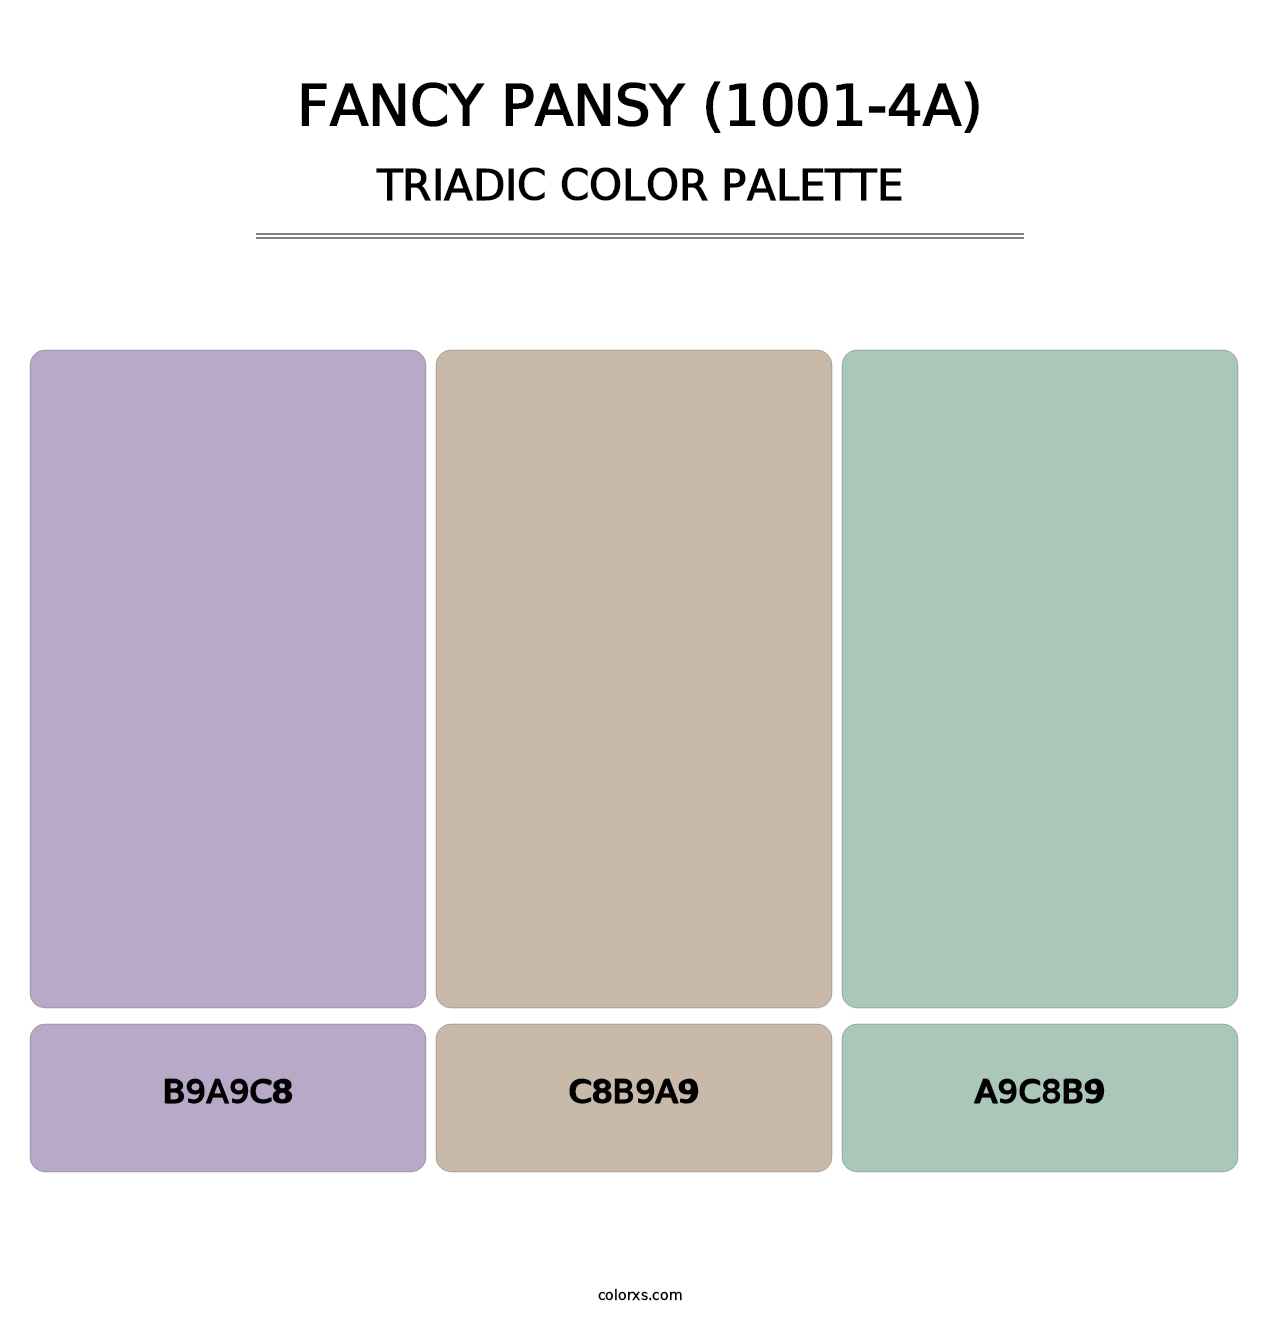 Fancy Pansy (1001-4A) - Triadic Color Palette